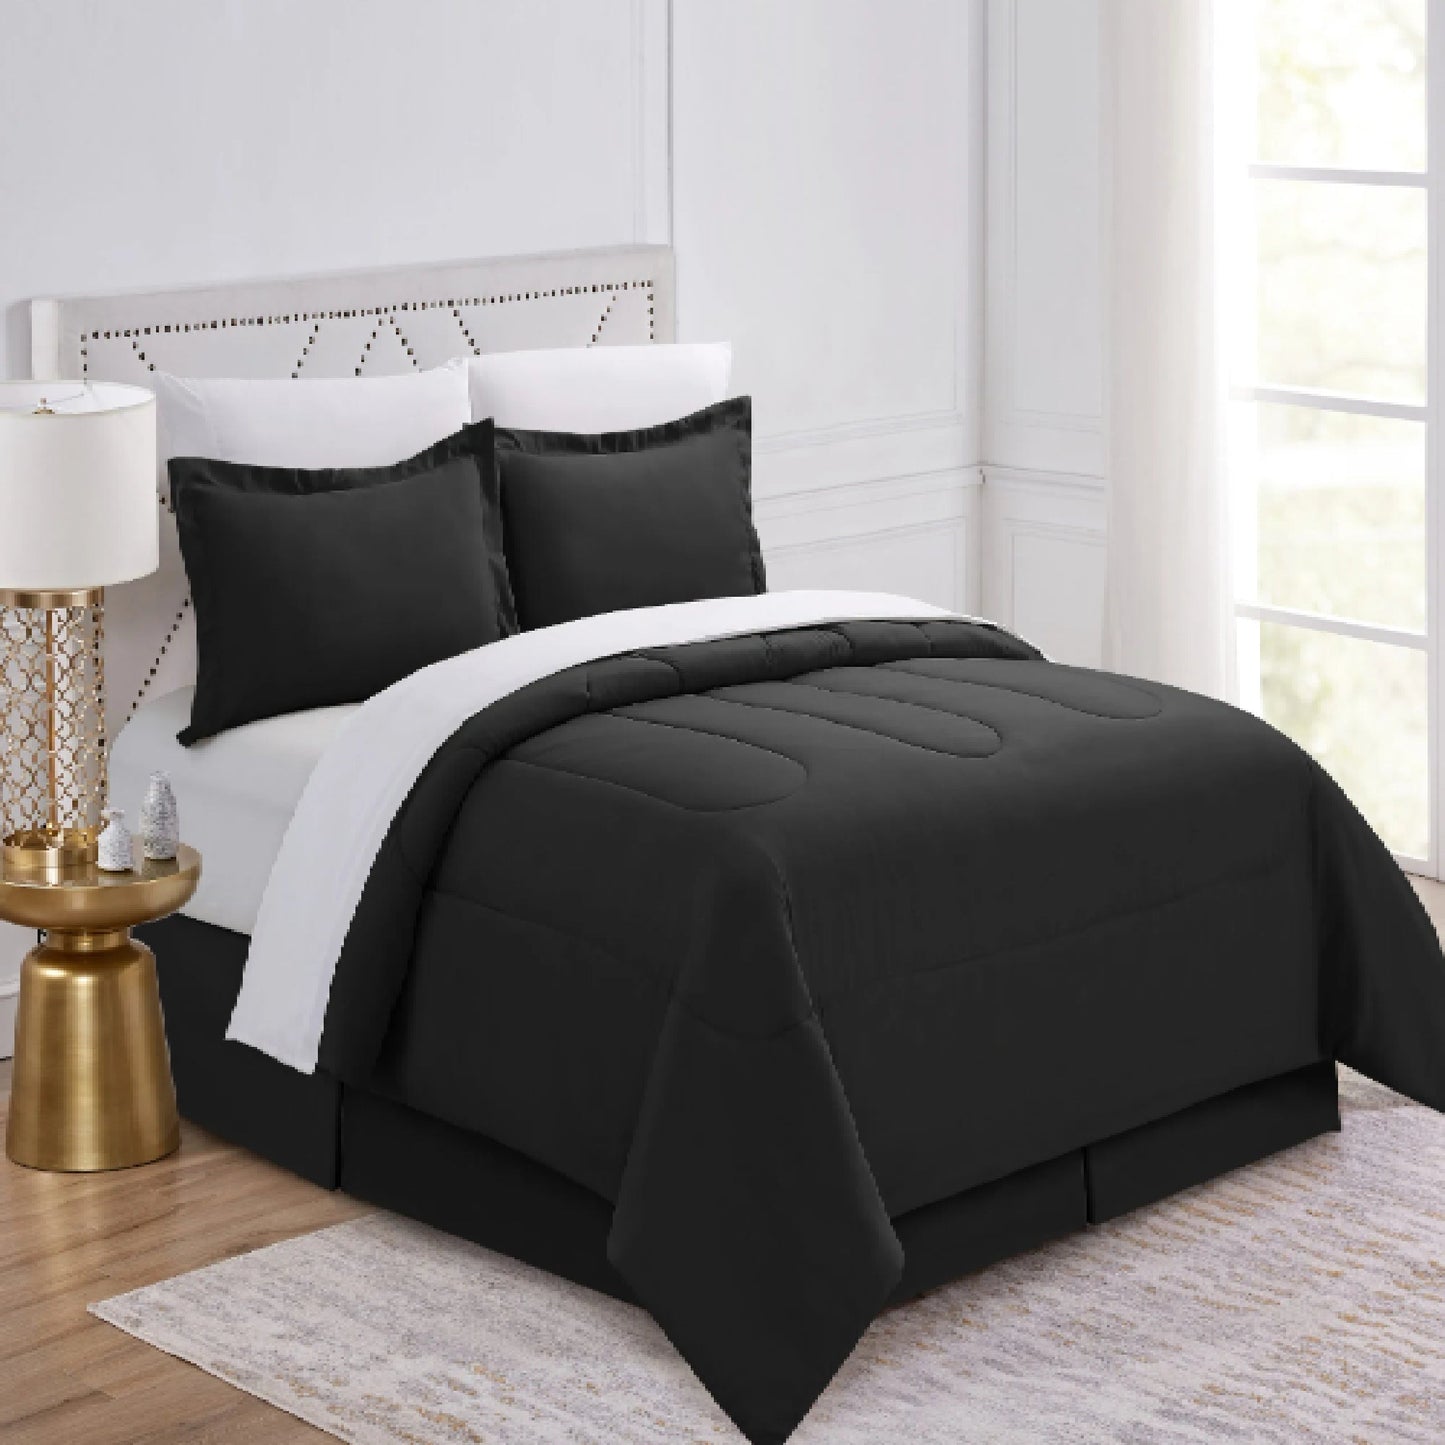 Transform Your Bed into an Oasis of Serenity with Elegant Duvet Set - Black